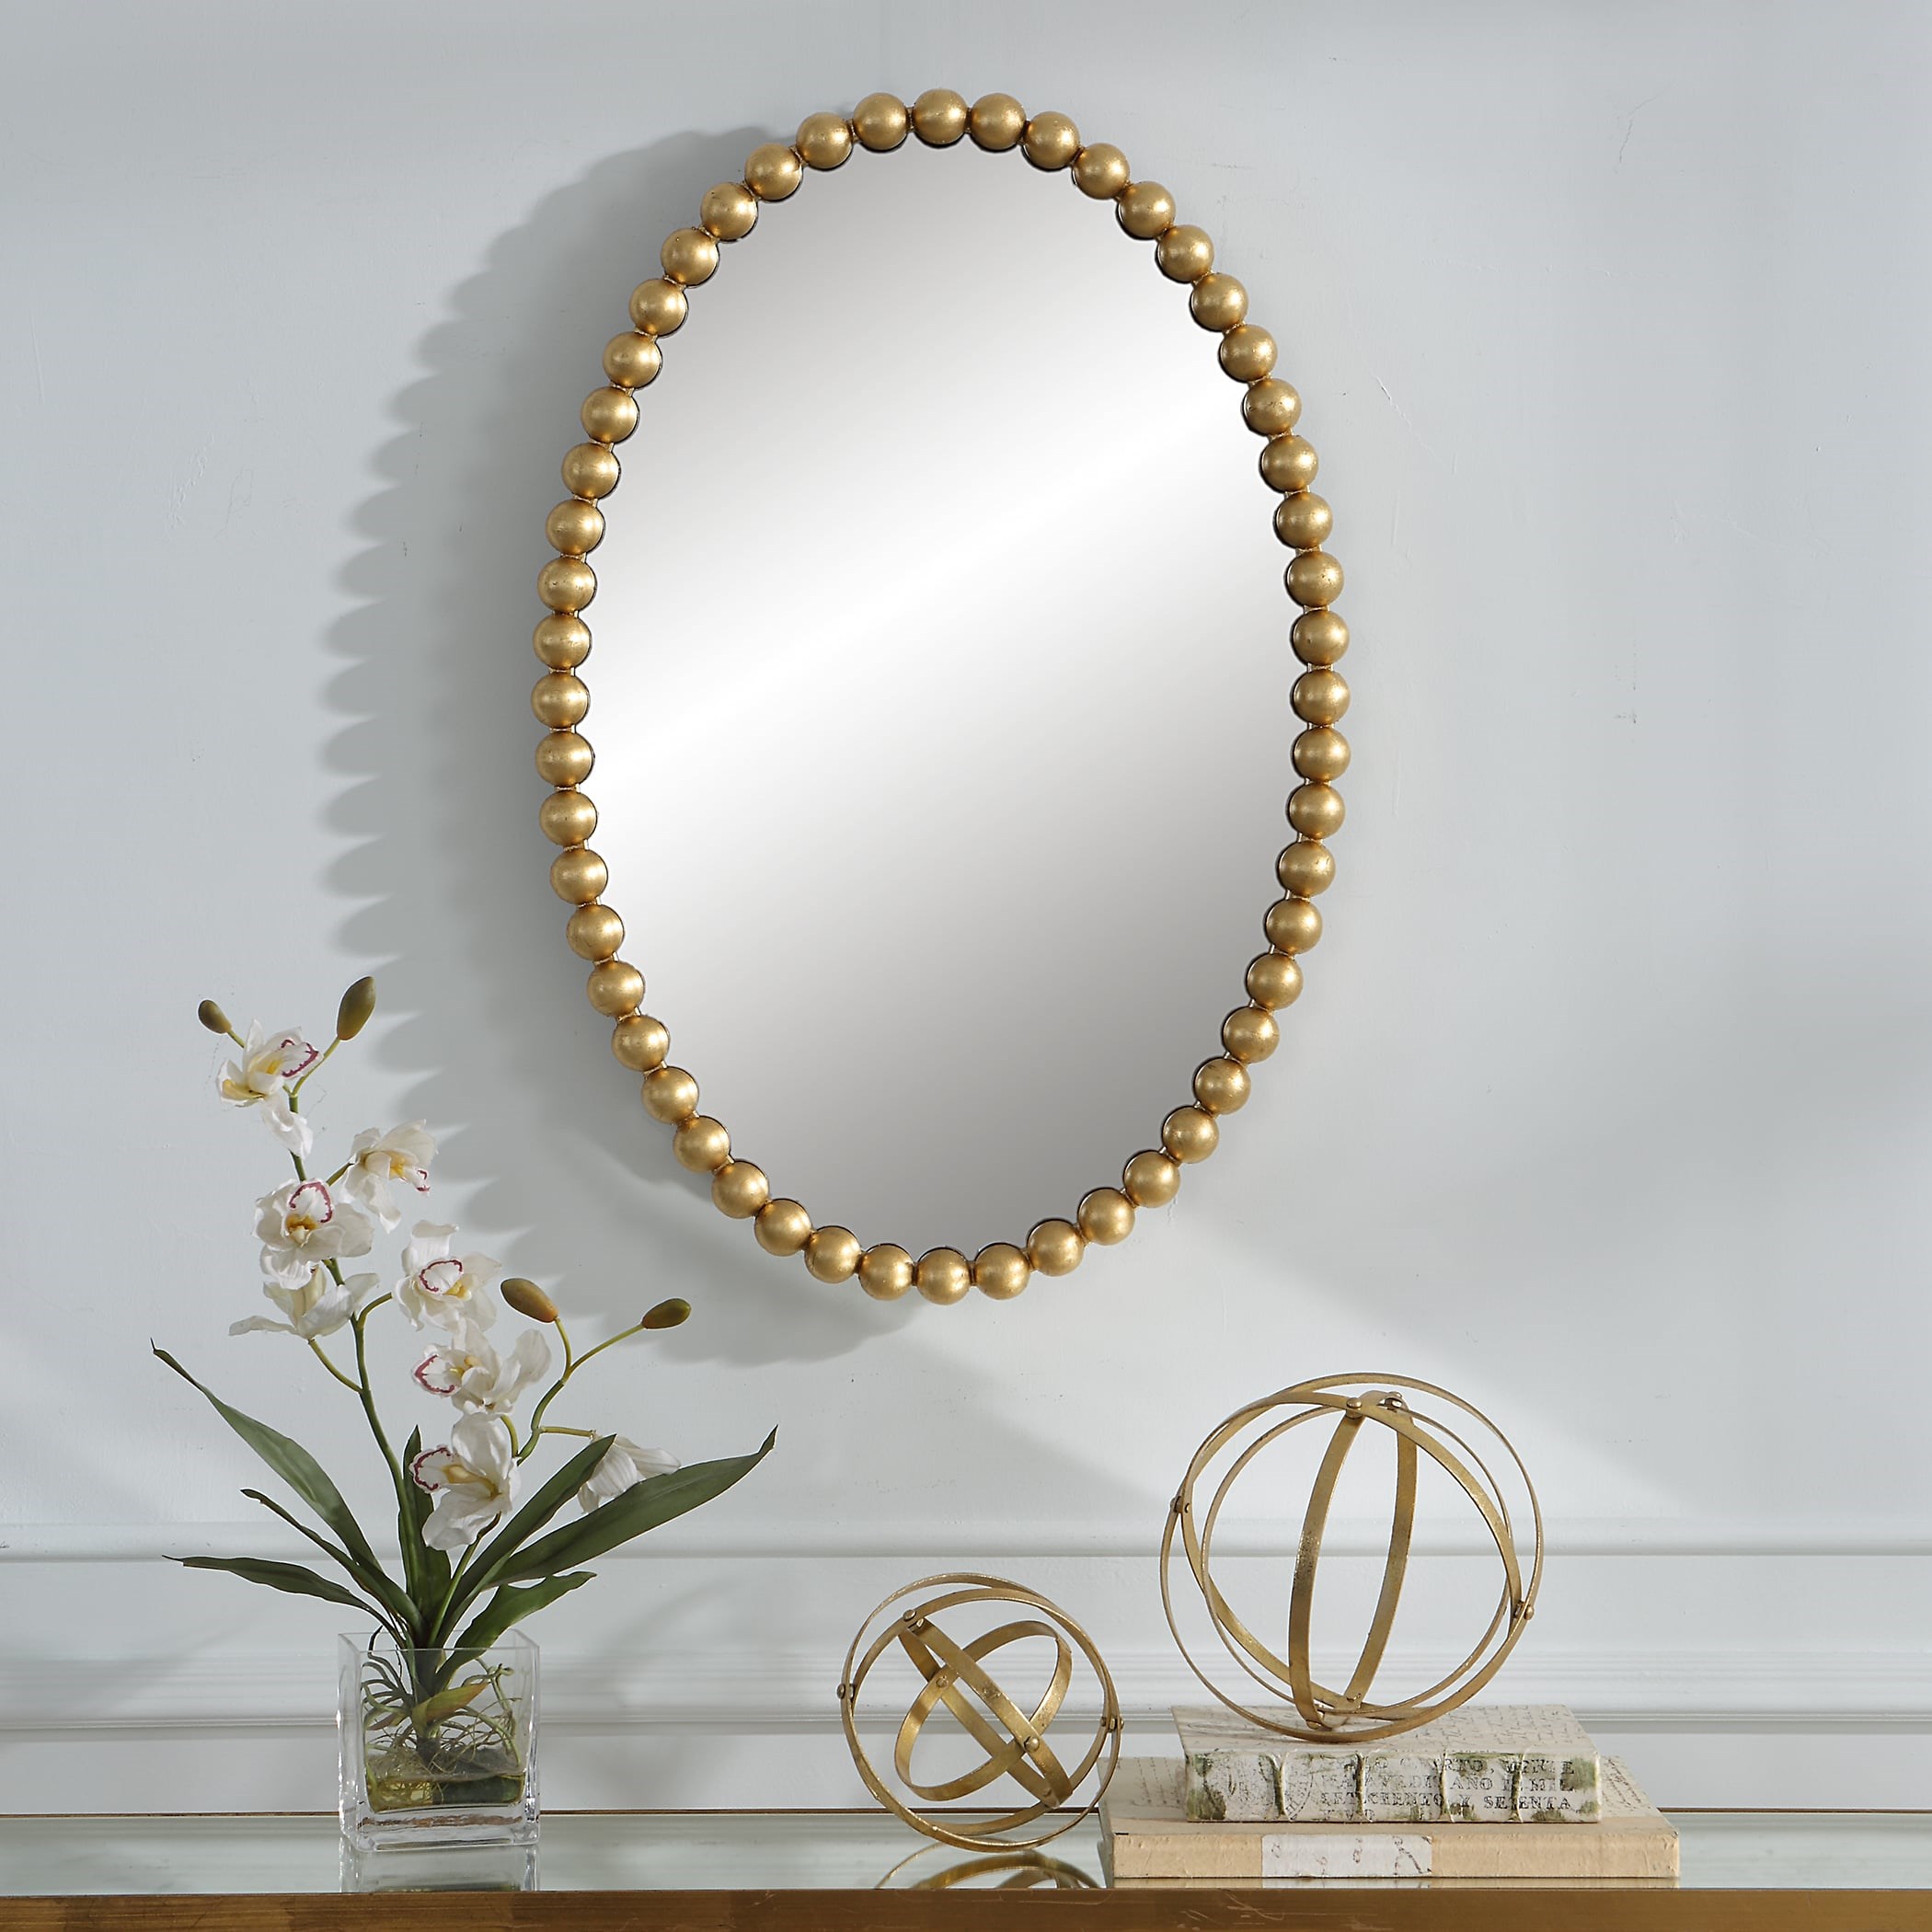 Uttermost Serna 09875 Contemporary Oval Wall Mirror with Gold